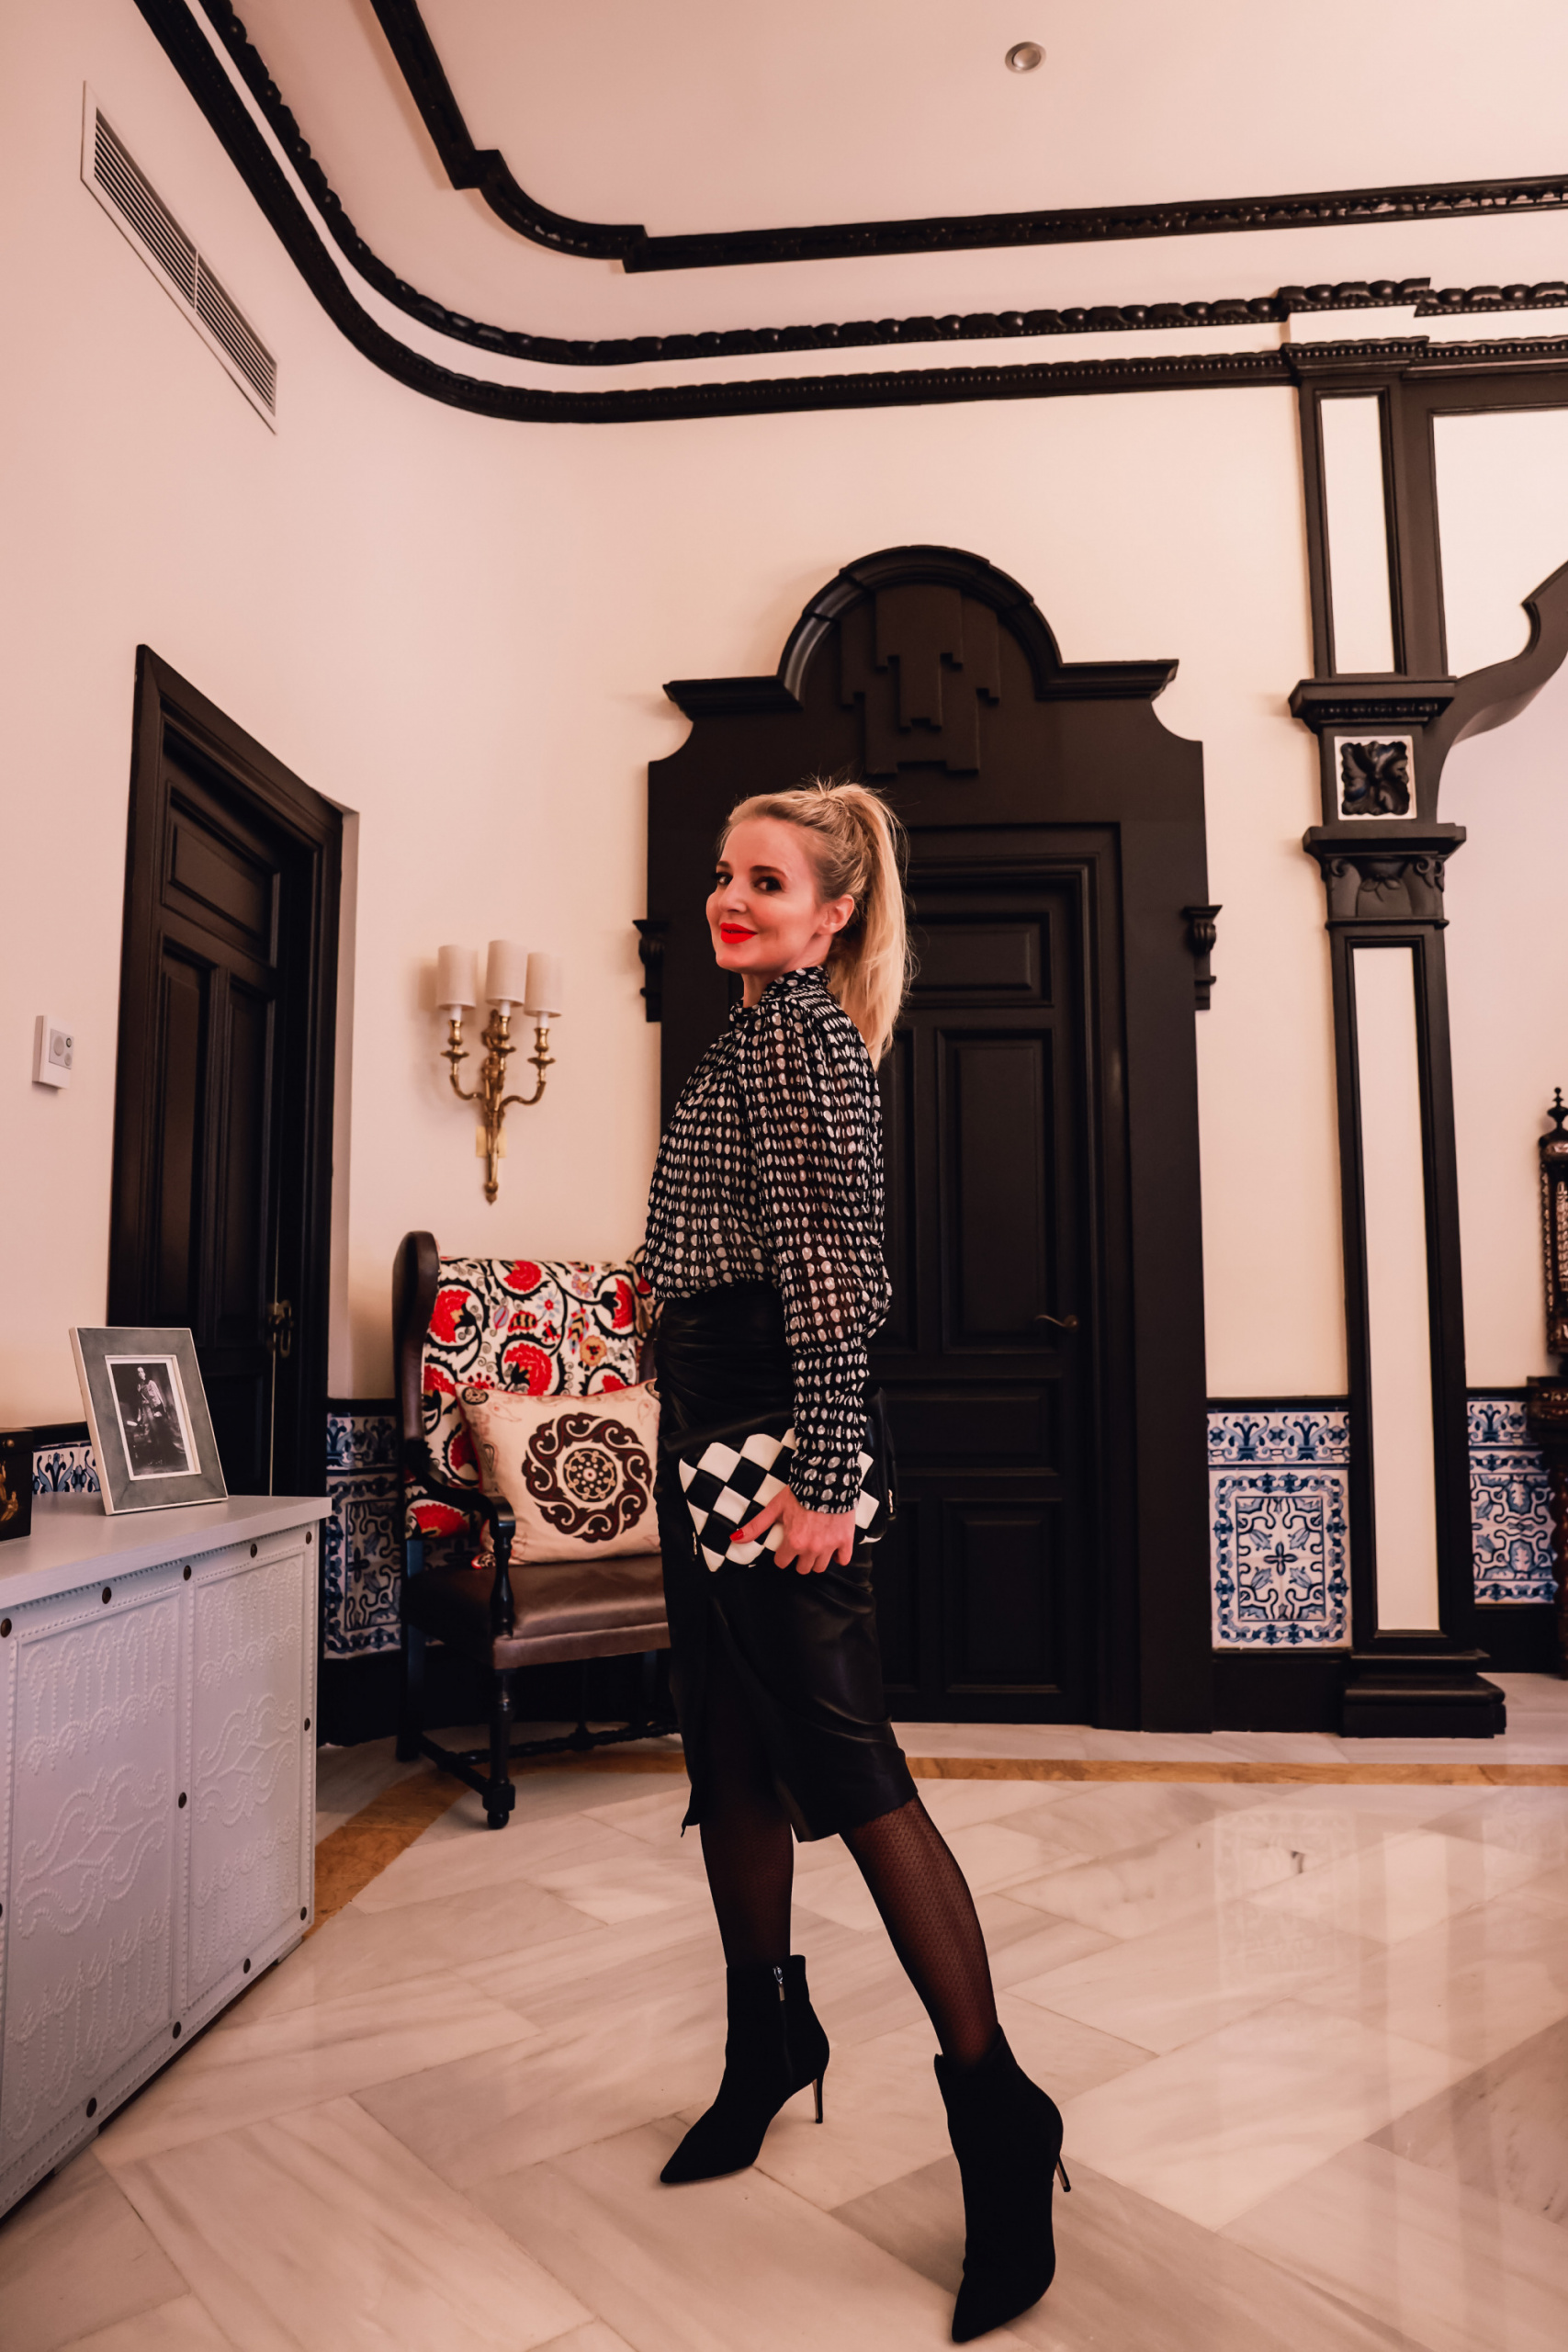 office outfits, stylish office outfits, chic office outfits, office outfits over 40, workwear over 40, stylish workwear, erin busbee, iro black leather midi skirt, ba&sh printed blouse pointed toe schutz boots, ba&sh black and white checkered bag, sevilla, spain, office to date night outfit